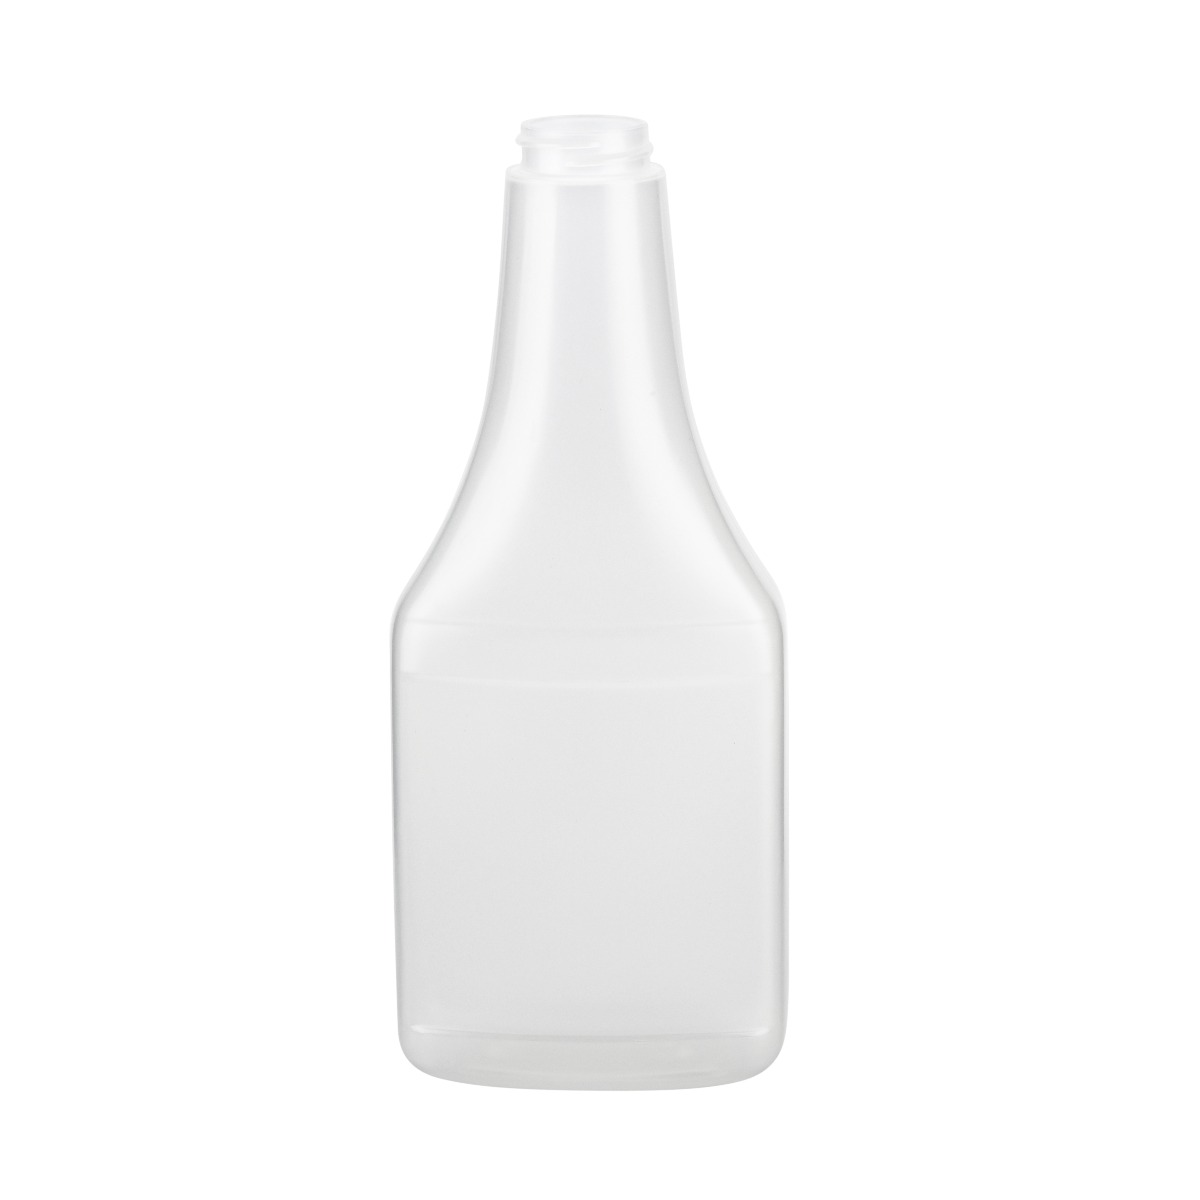 Plastic bottle with curved neck